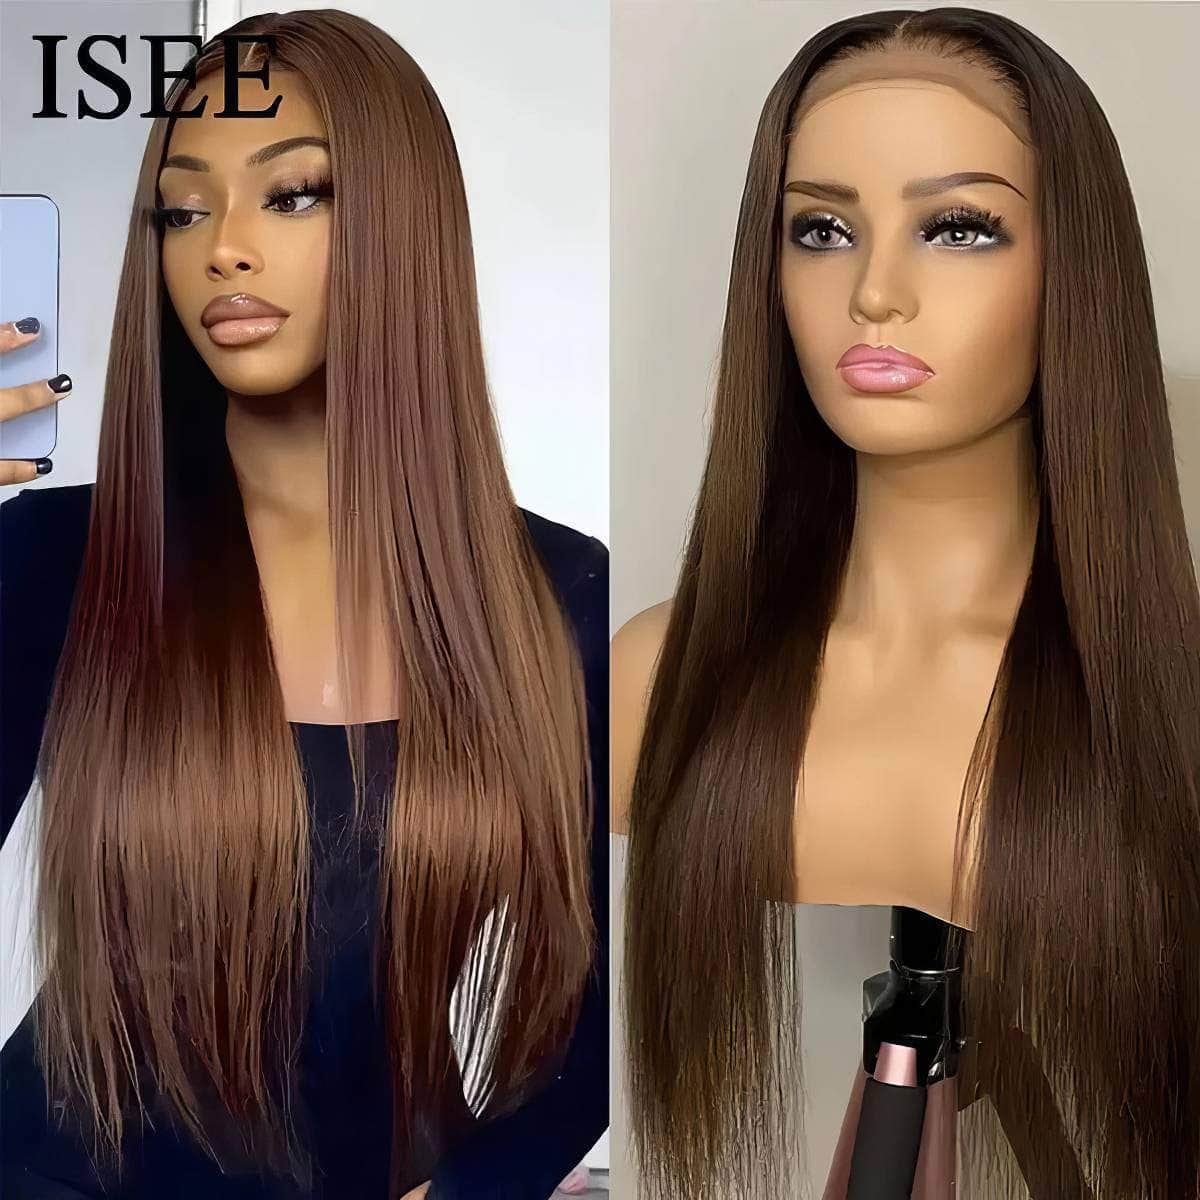 Colored Lace Front Wig - Wear And Go, #4 Chocolate Brown, 4x4 Glueless Transparent Straight Lace Closure, Human Hair Wig 4X4 Glueless Wig / 18inches / 180%